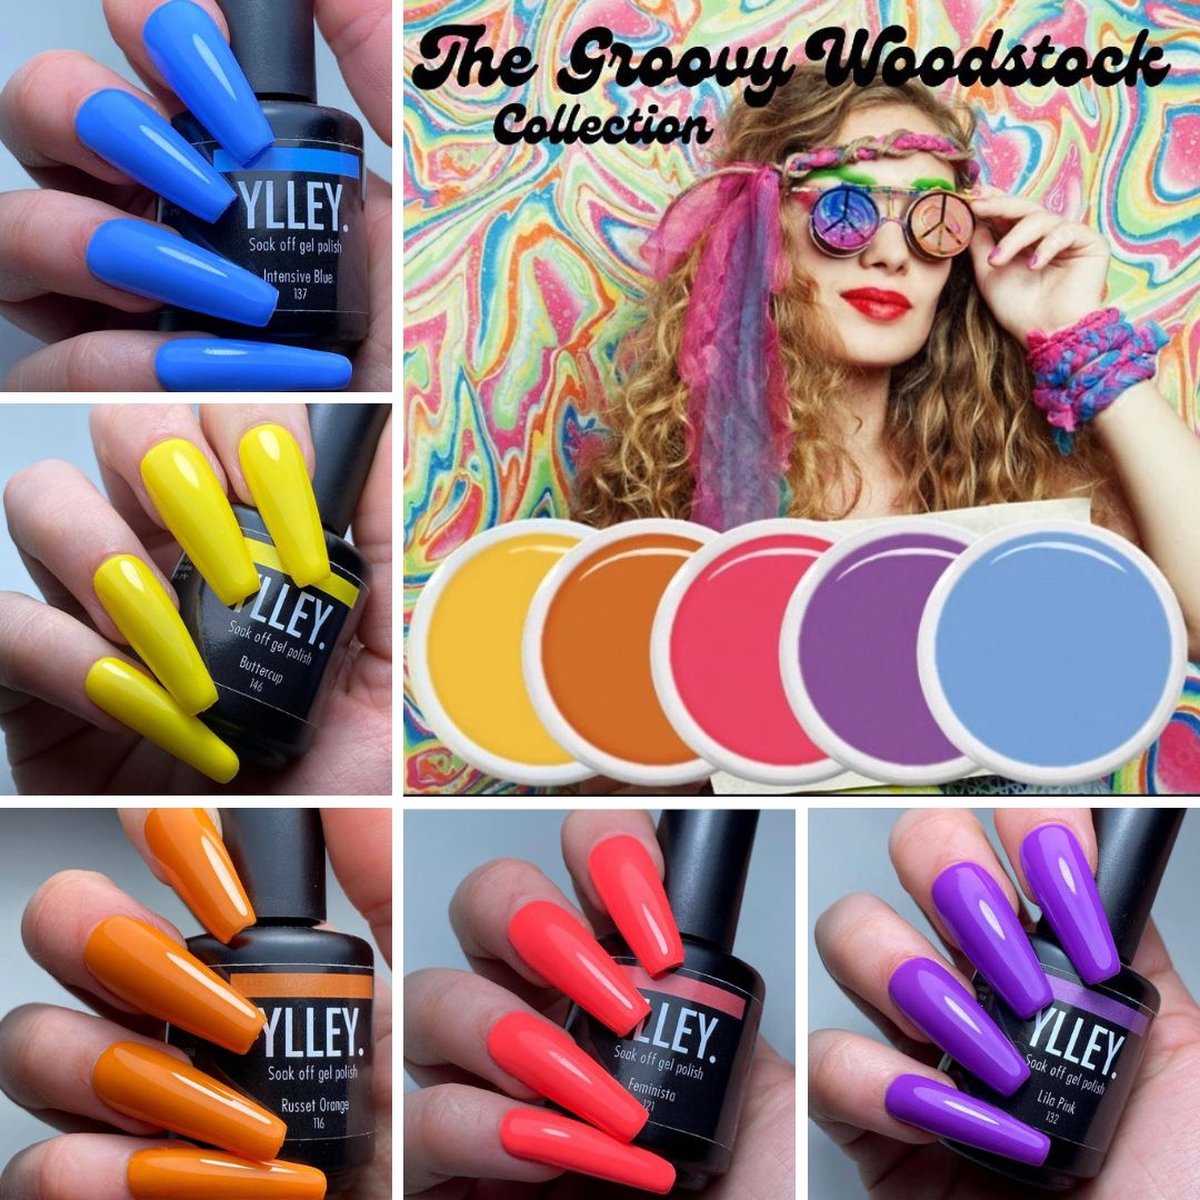 YLLEY -The Groovy Woodstock Collection - Gellak - Manicure